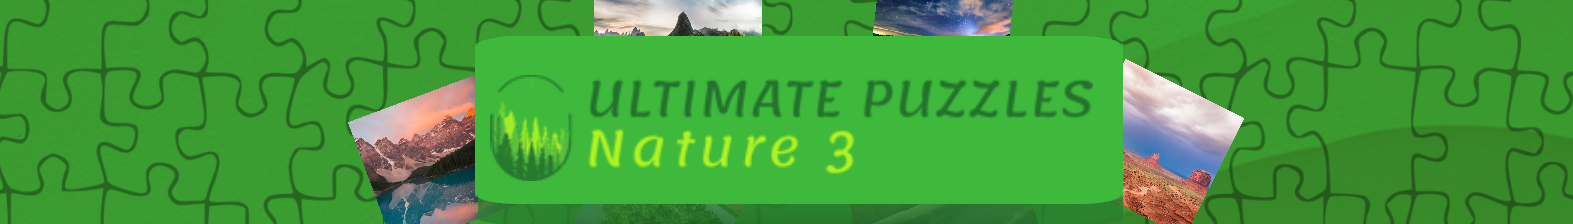 Ultimate Puzzles Nature 3